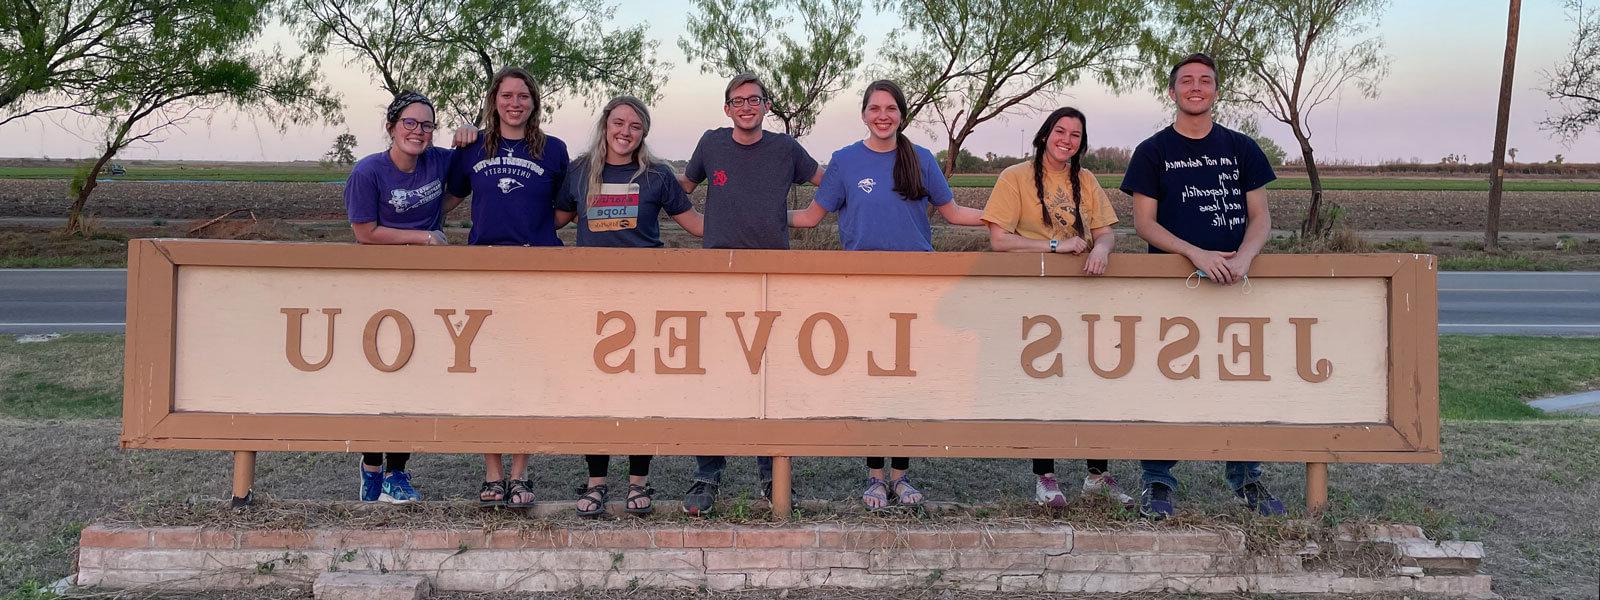 group of college students standing behind sign that says Jesus Loves you